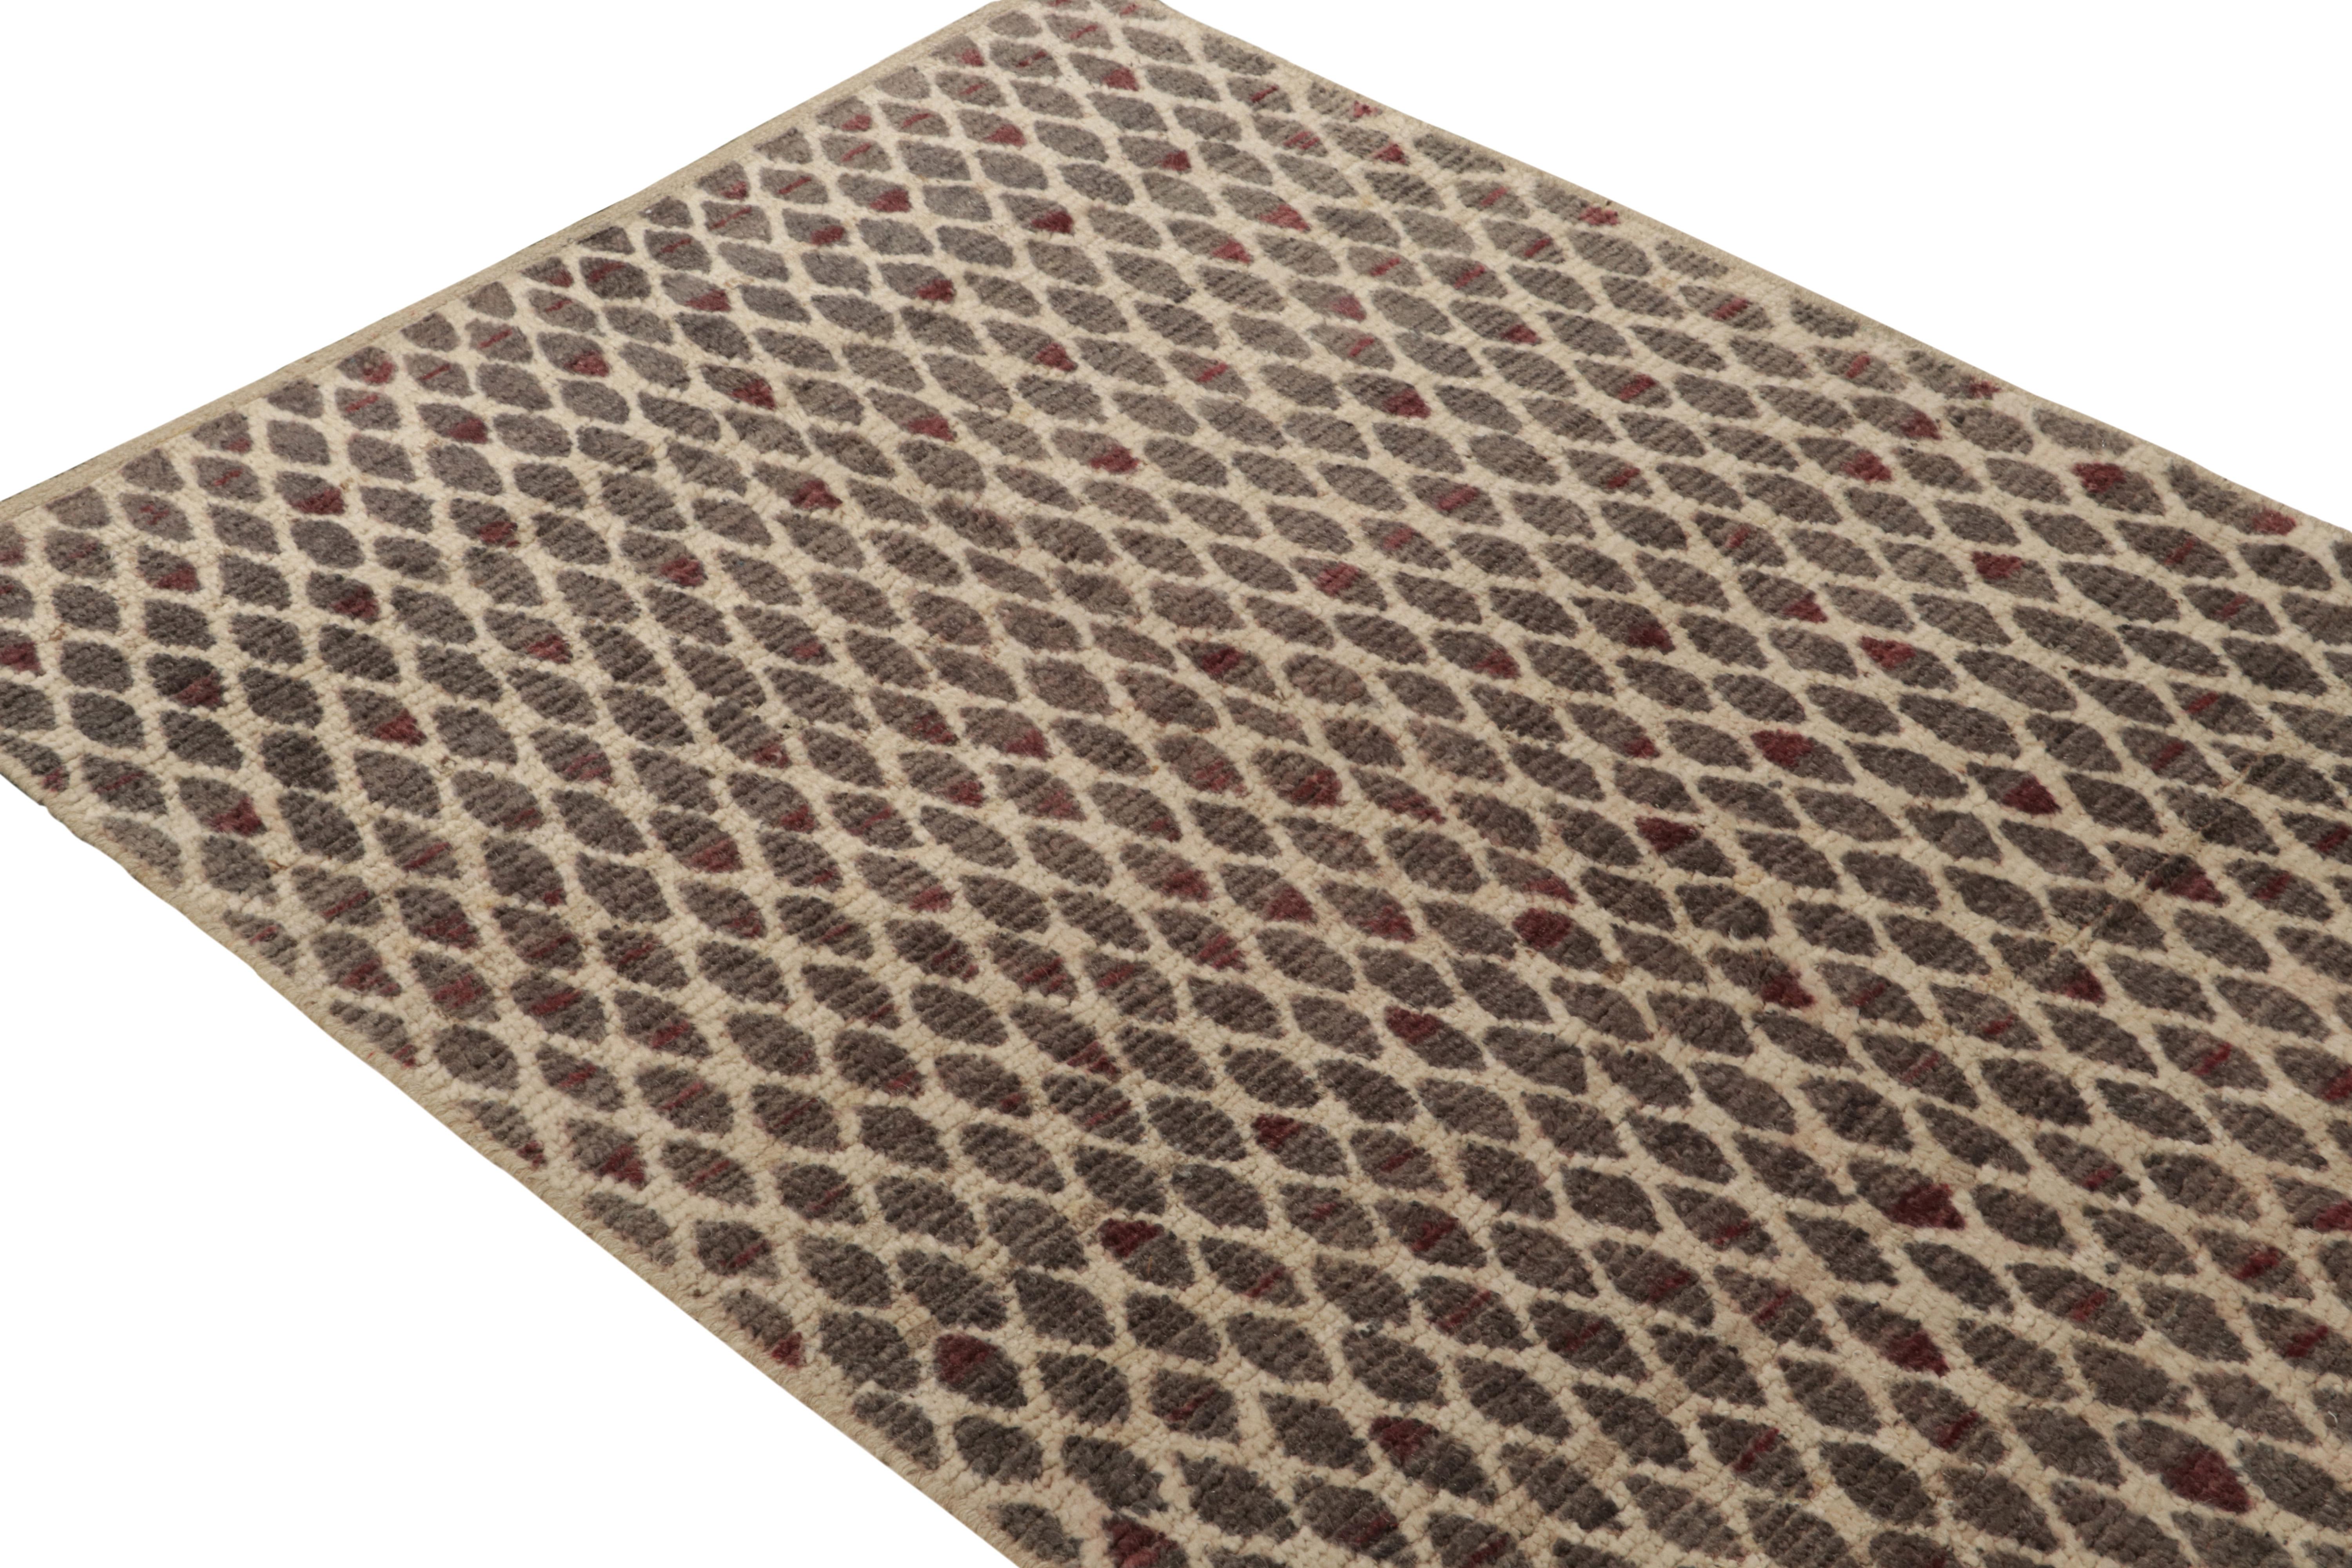 Afghan Rug & Kilim's Contemporary Moroccan Style Runner in Beige-Brown, Grey & Red For Sale